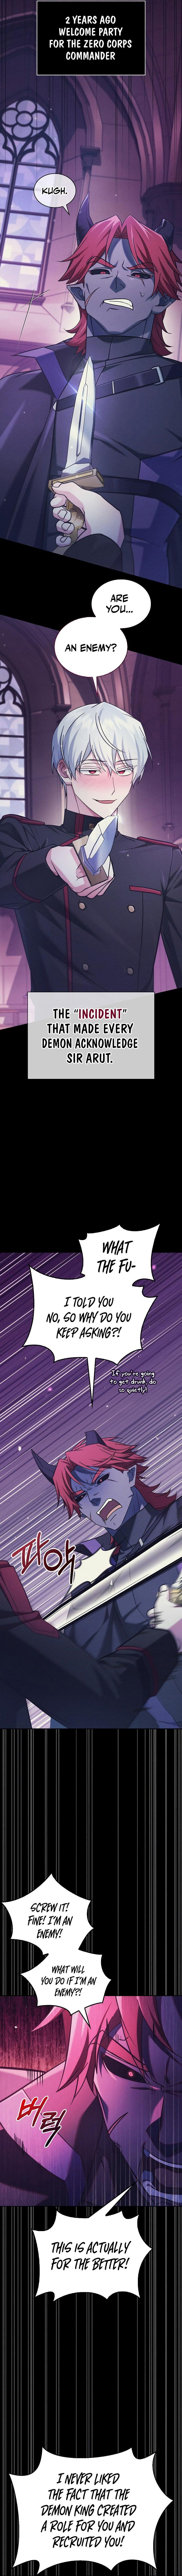 I’m Not That Kind of Talent Chapter 40 page 4